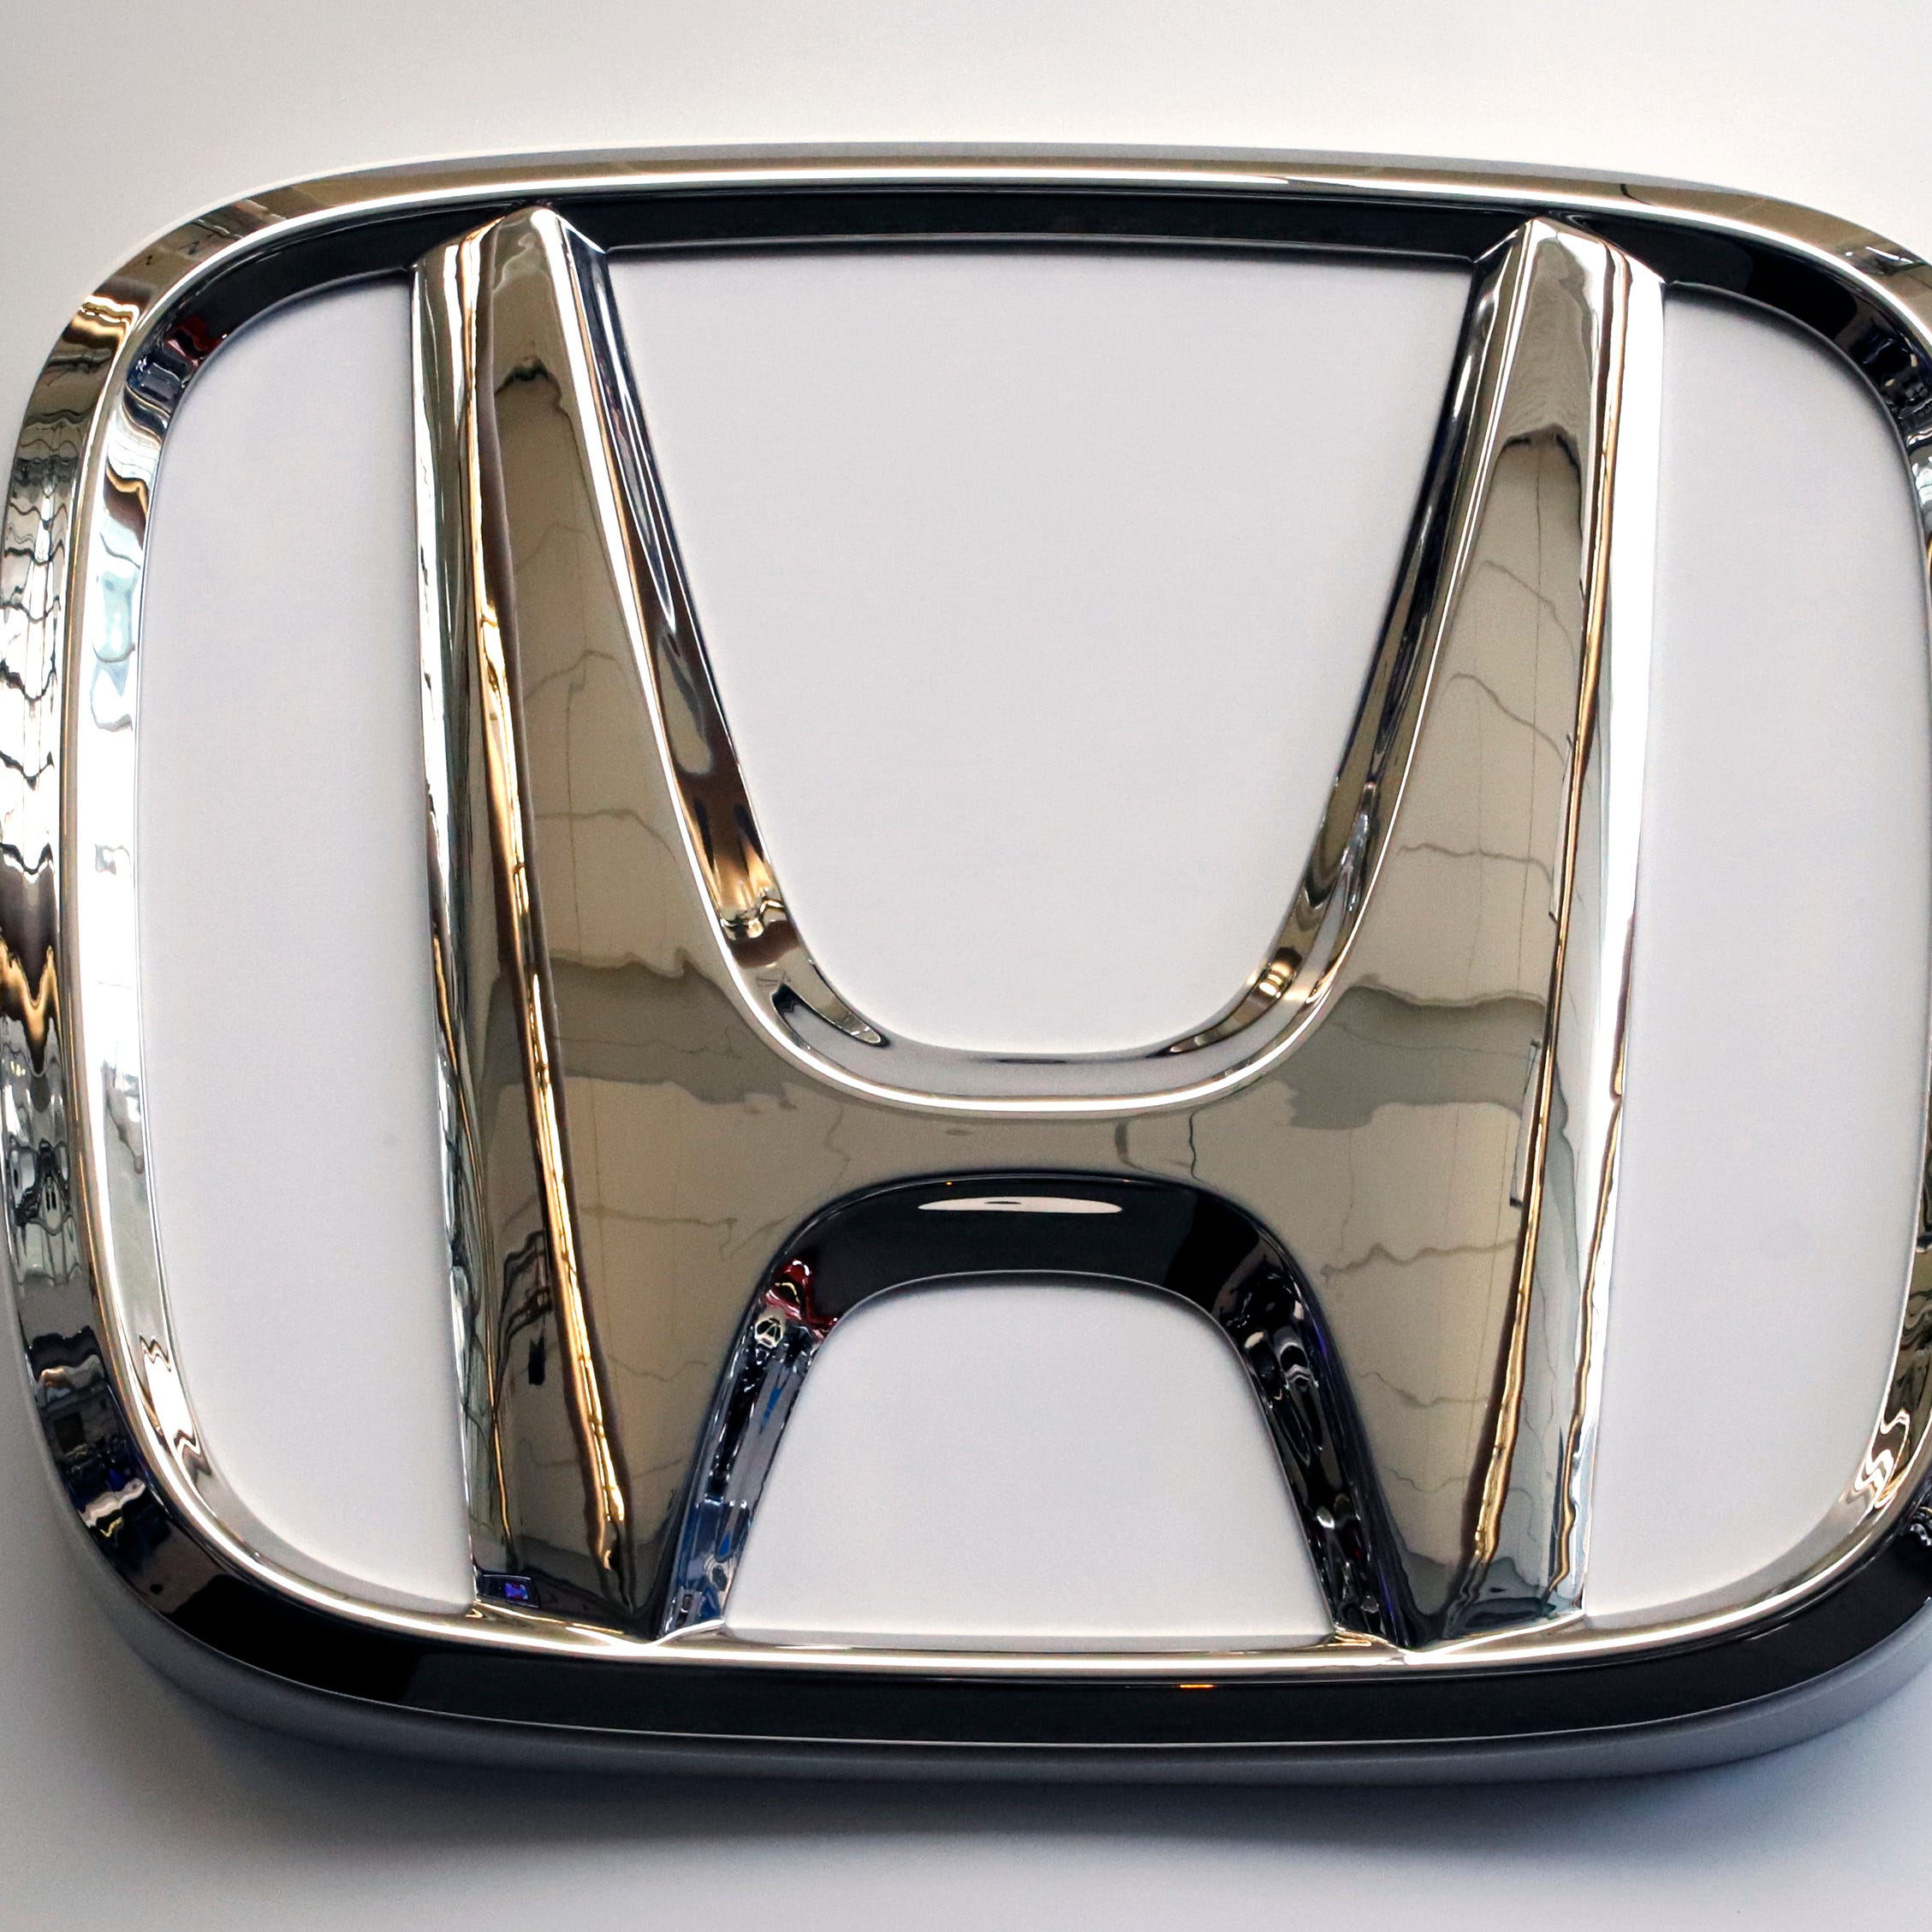 Honda is recalling a half-million vehicles in the U.S. and Canada, Wednesday, March 15, 2023, because the front seat belts may not latch properly. The recall covers some of the the automaker's top-selling models including the 2017 through 2020 CR-V, the 2018 and 2019 Accord, the 2018 through 2020 Odyssey and the 2019 Insight. Also included is the Acura RDX from the 2019 and 2020 model years.